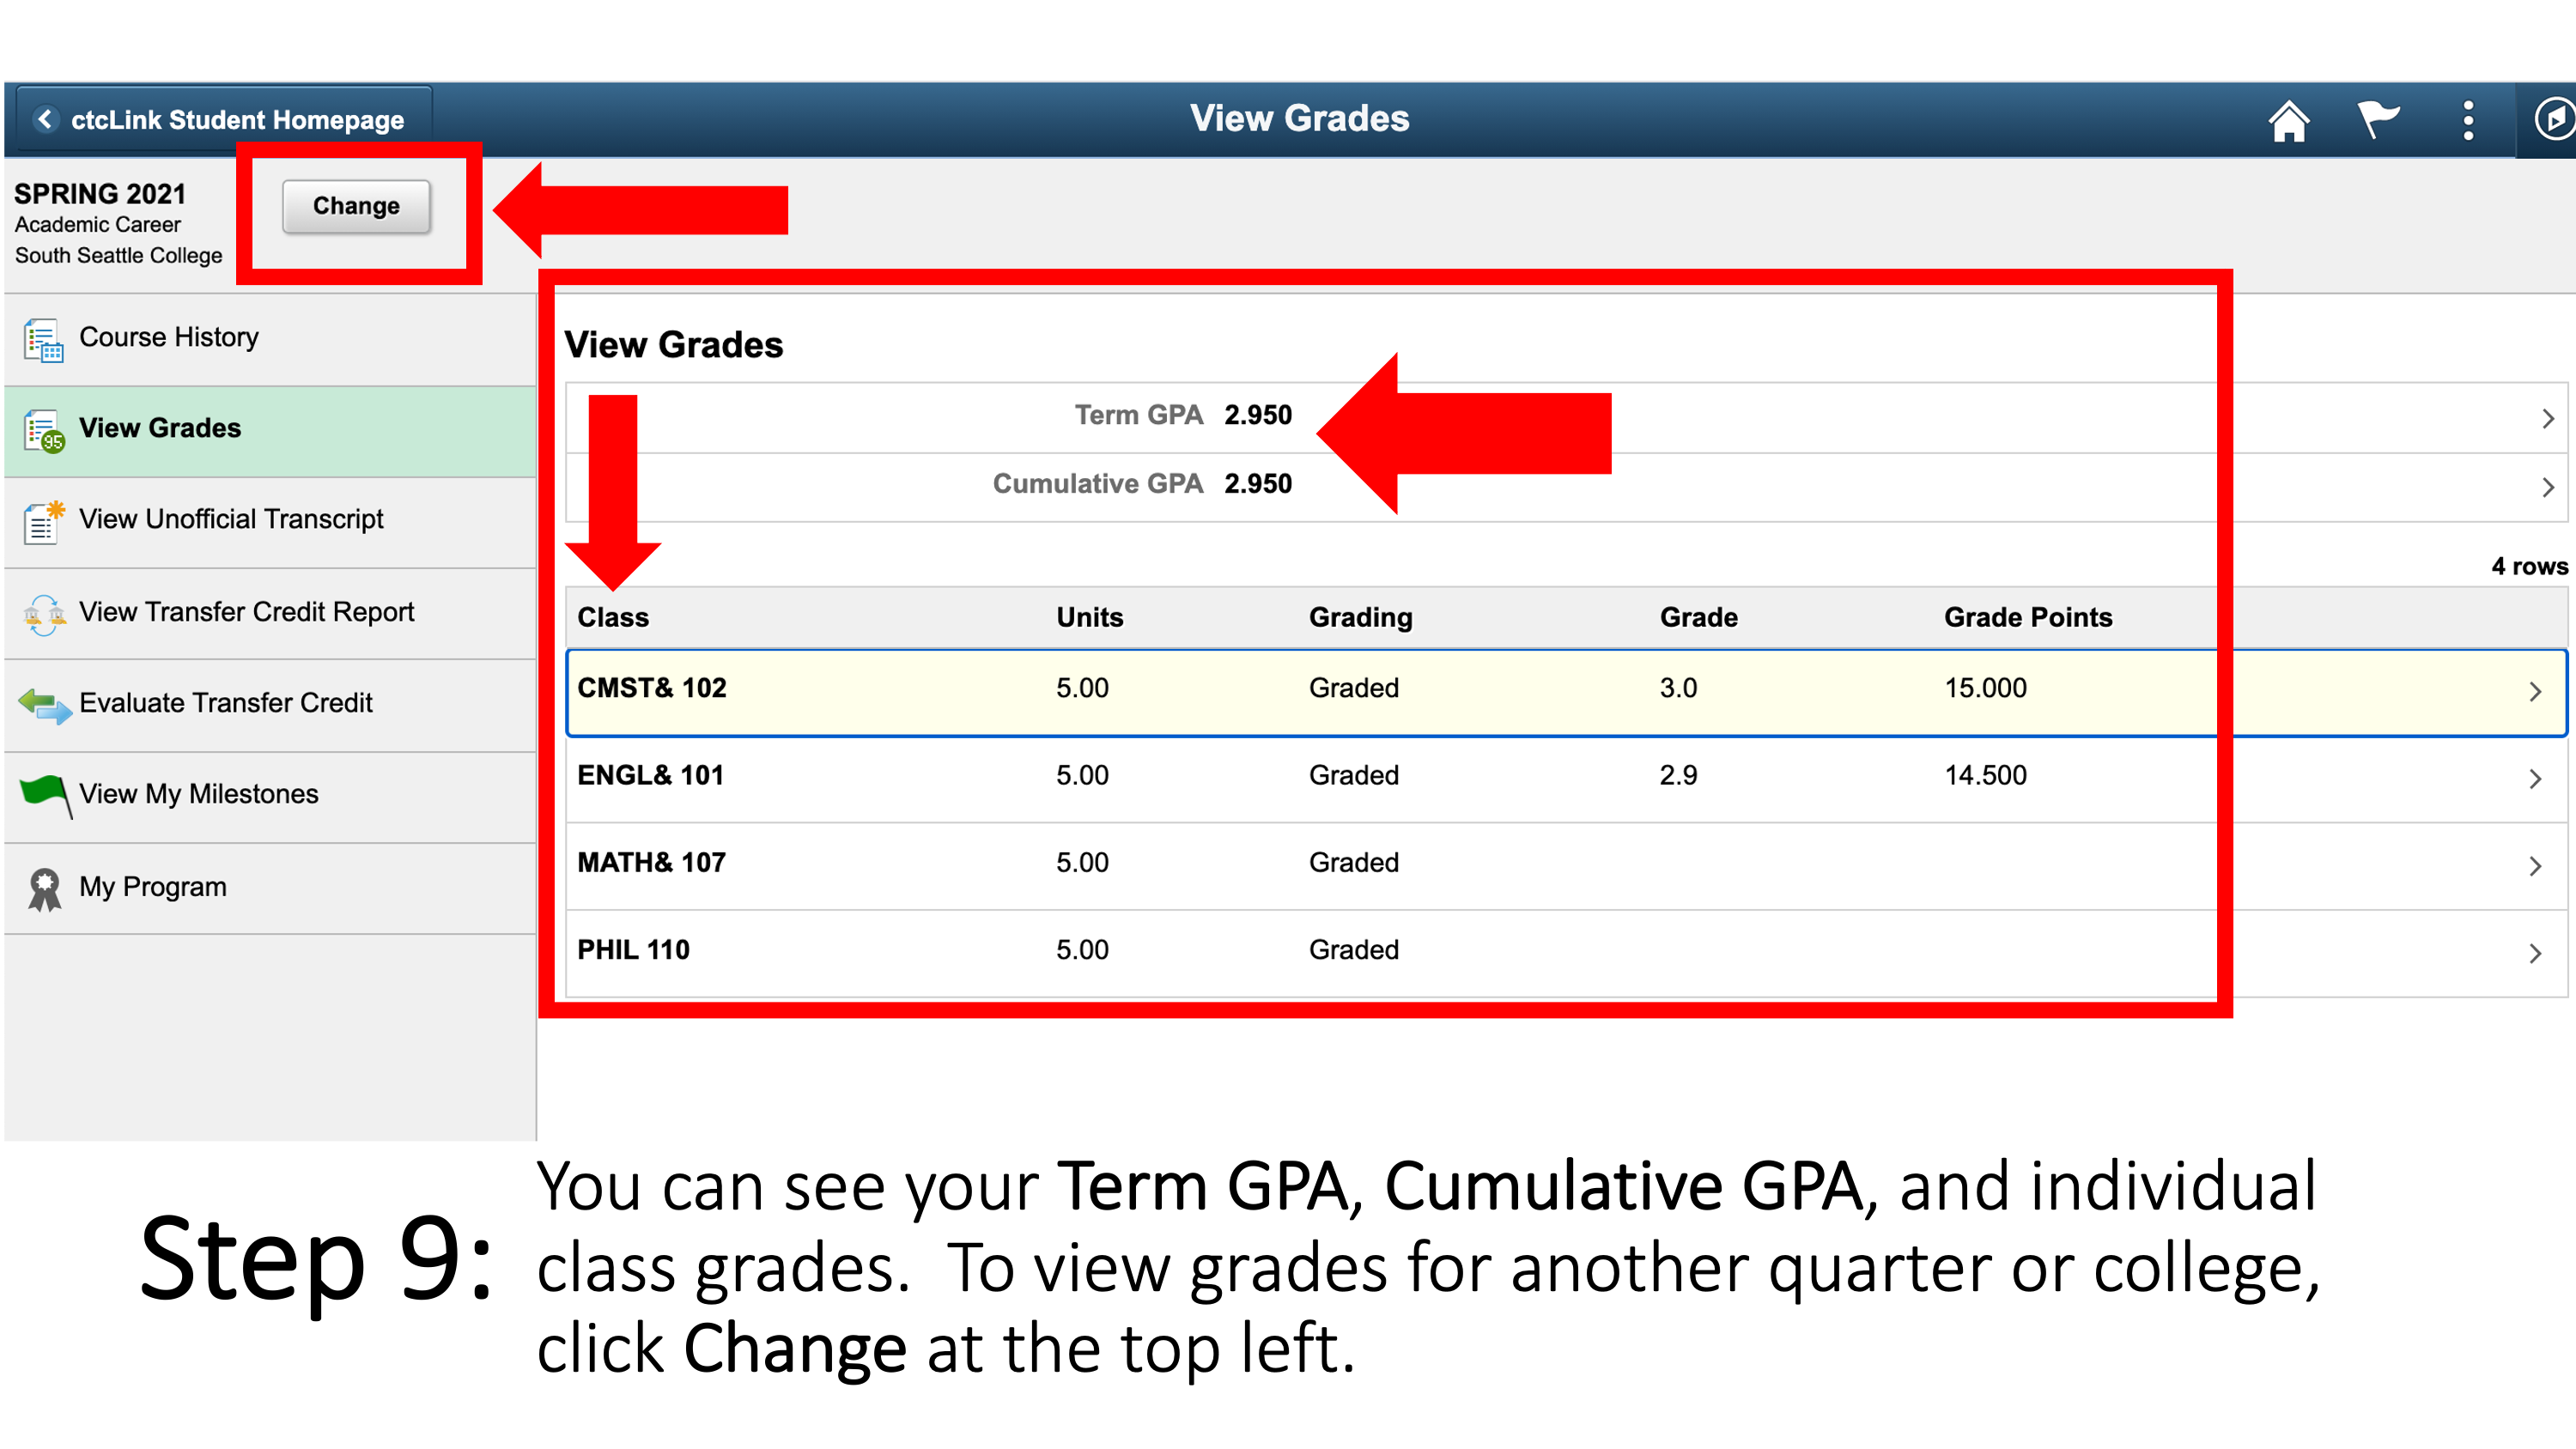 You can see your Term GPA, Cumulative GPA, and individual class grades.  To view grades for another quarter or college, click Change at the top left.